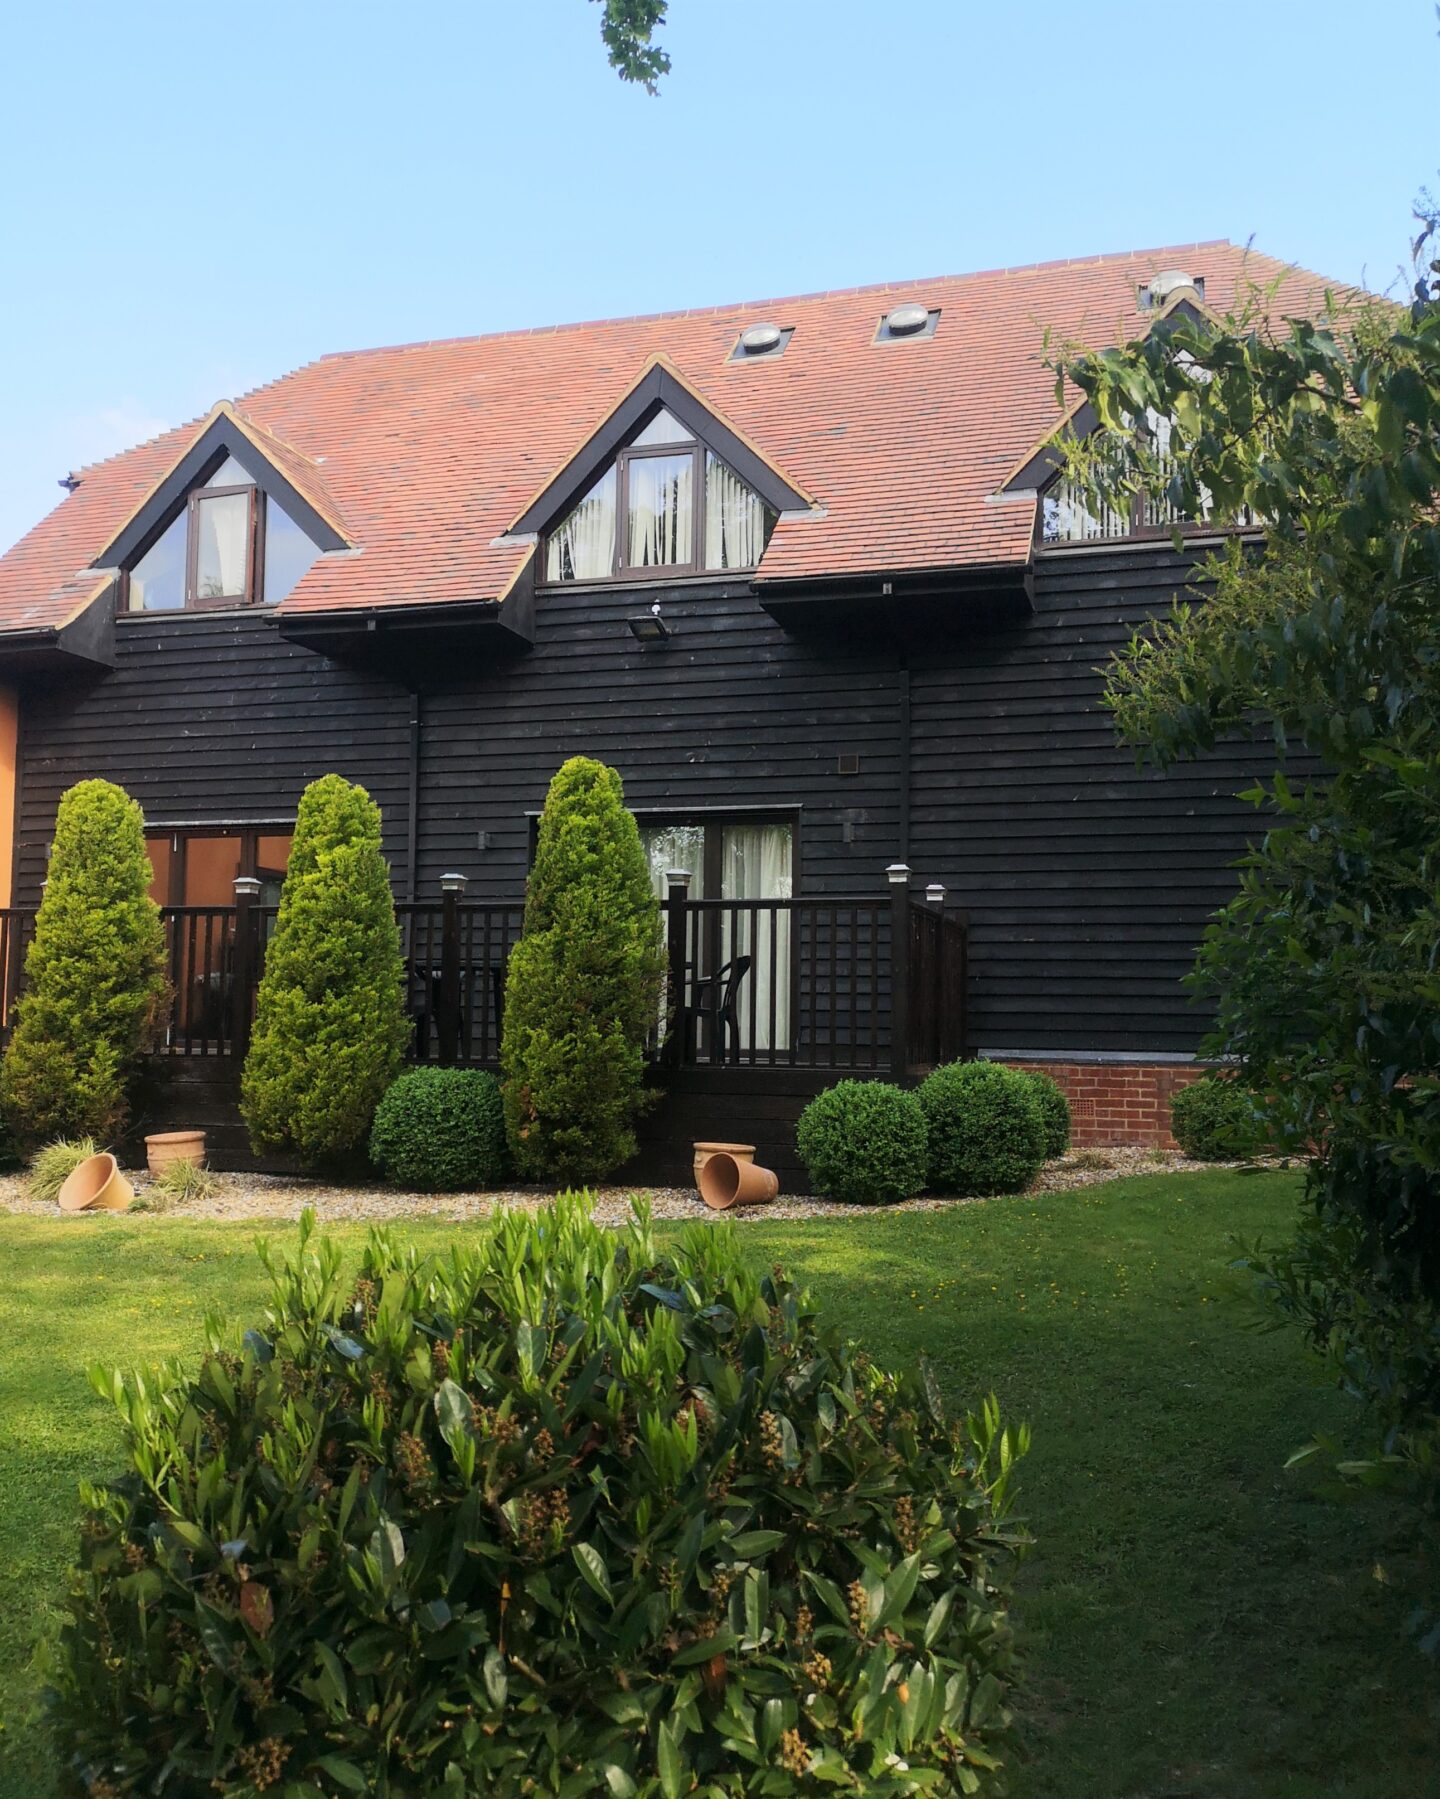 Honeywood Lodge, Bloom Stays, Kent Holiday, Holiday Homes, Cottages In Kent, Kent Life, Staycations, Holiday Accommodation Agency, Visit Kent, Canterbury, the Frenchie Mummy